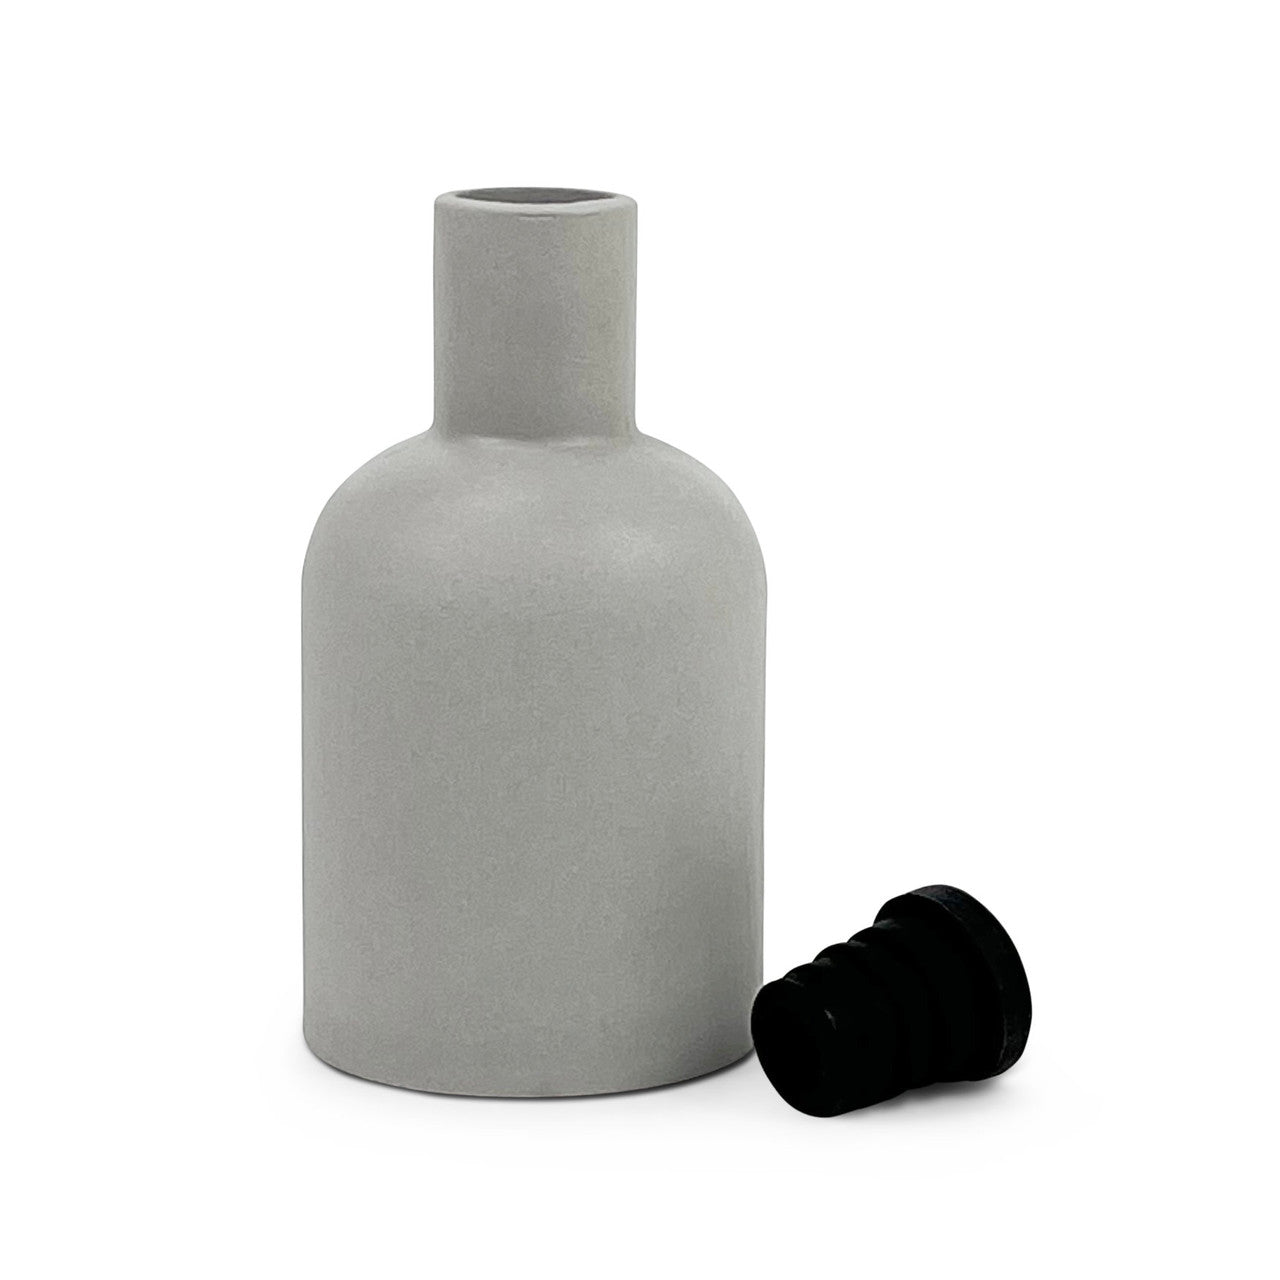 Ceramic Bottle for Diffusers - Pale Grey